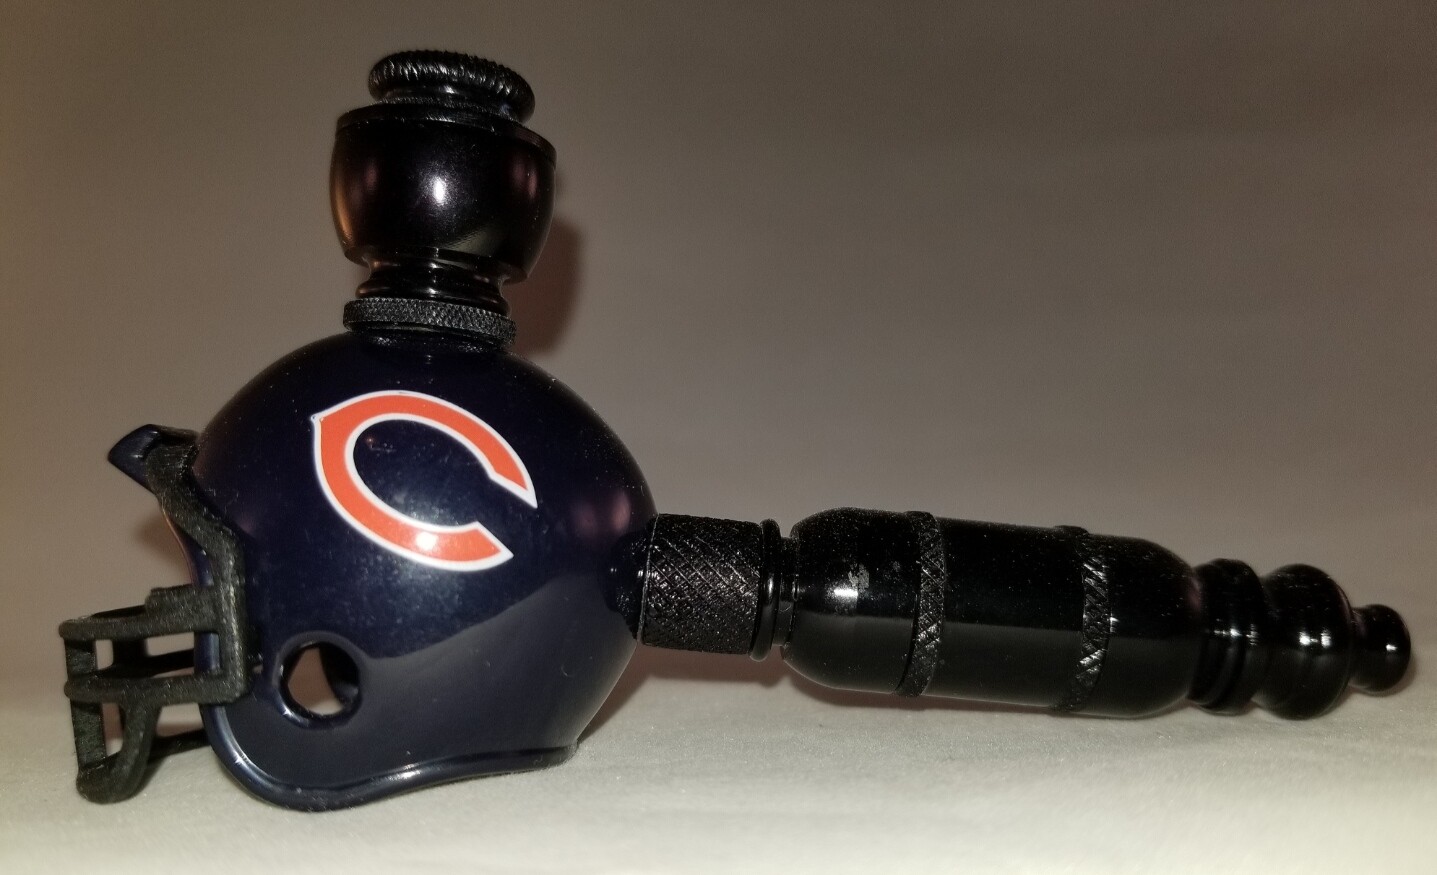 CHICAGO BEARS "BAD ASS" NFL FOOTBALL HELMET SMOKING PIPE Small Straight/Black Anodized